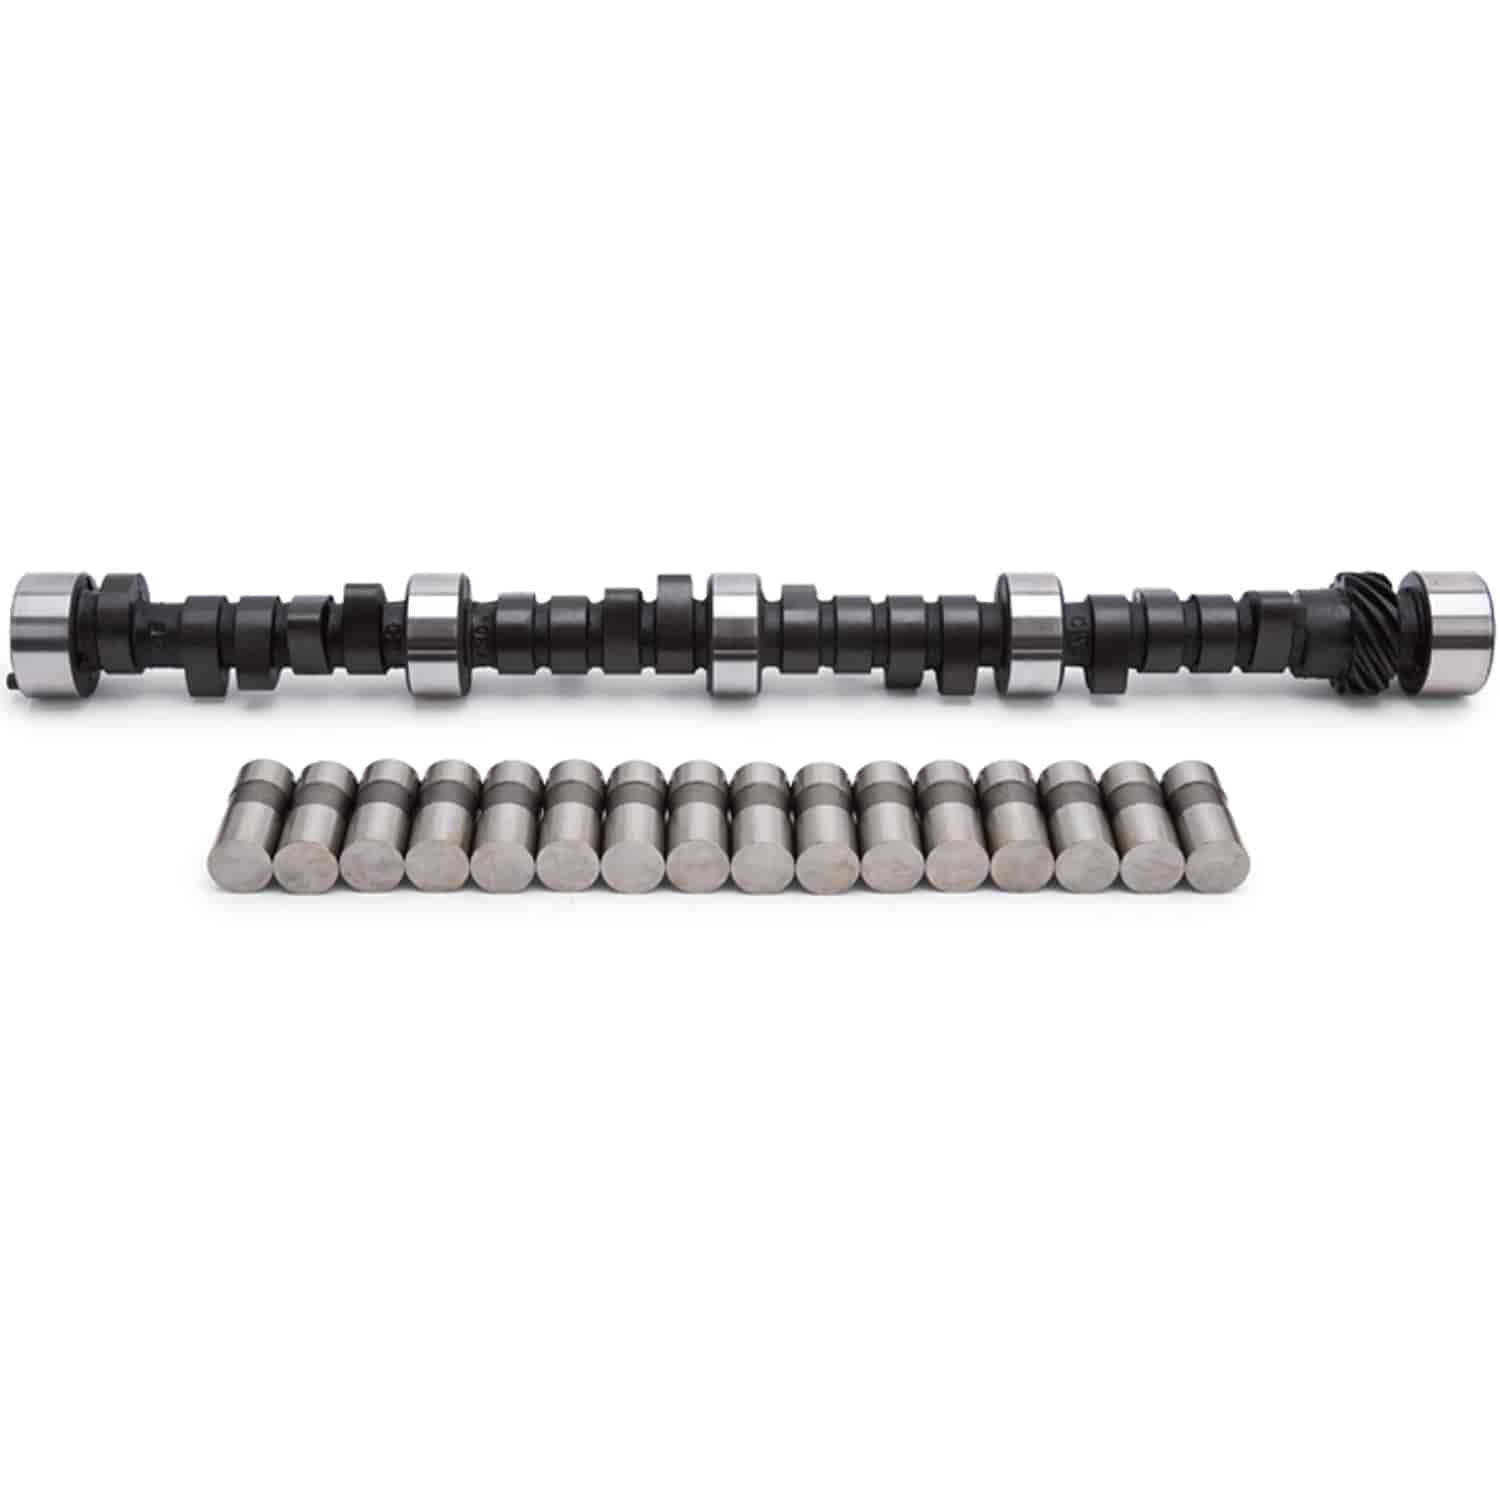 Torker-Plus Camshaft & Lifter Kit for Small Block Chevy